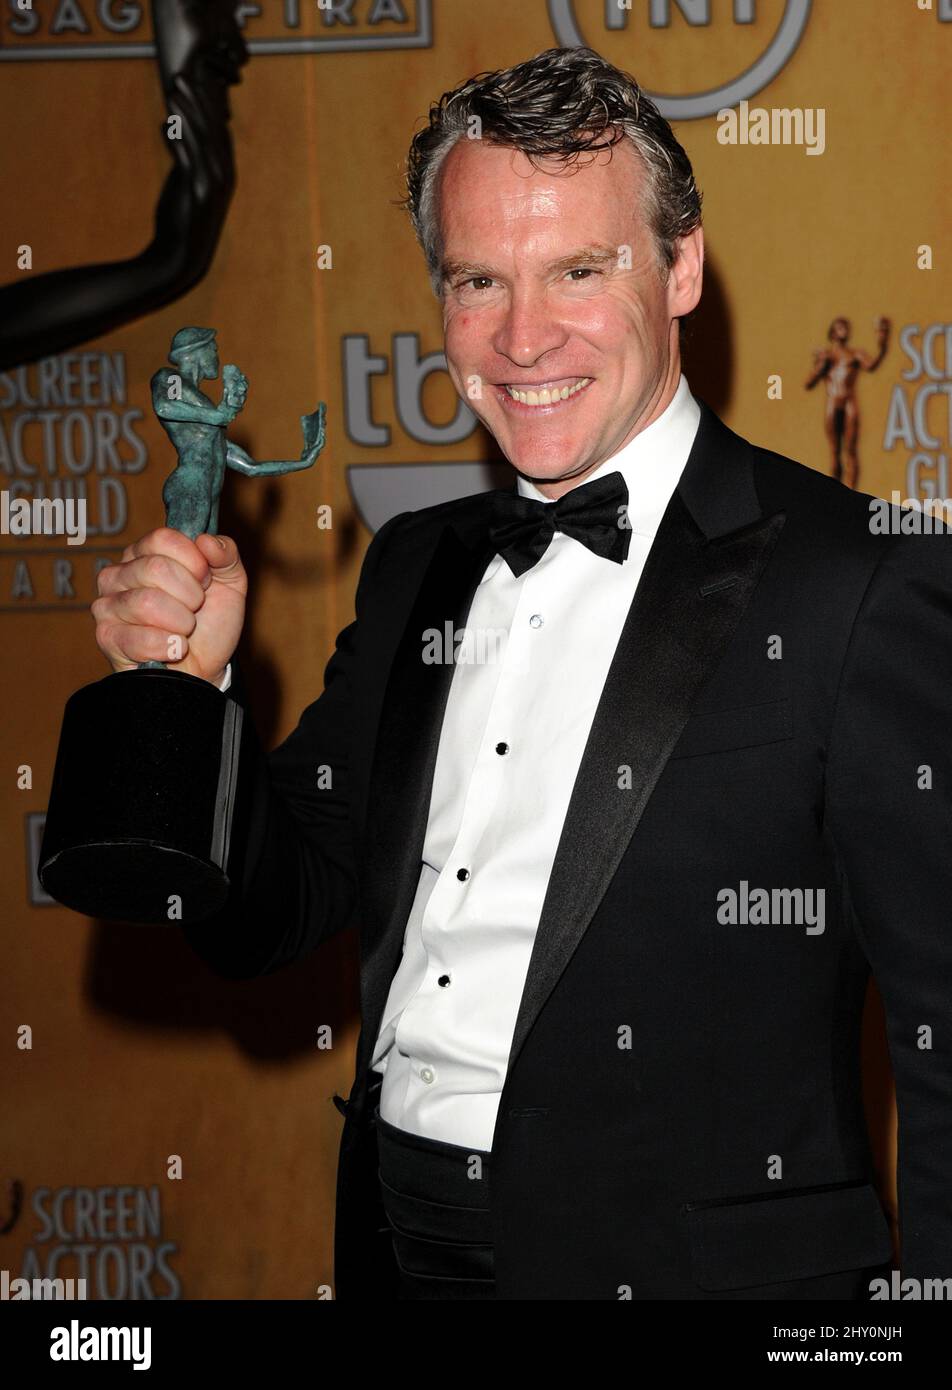 Tate Donovan smiles backstage with the award for outstanding cast in a motion picture for '“Argo'” at the 19th Annual Screen Actors Guild Awards. Stock Photo